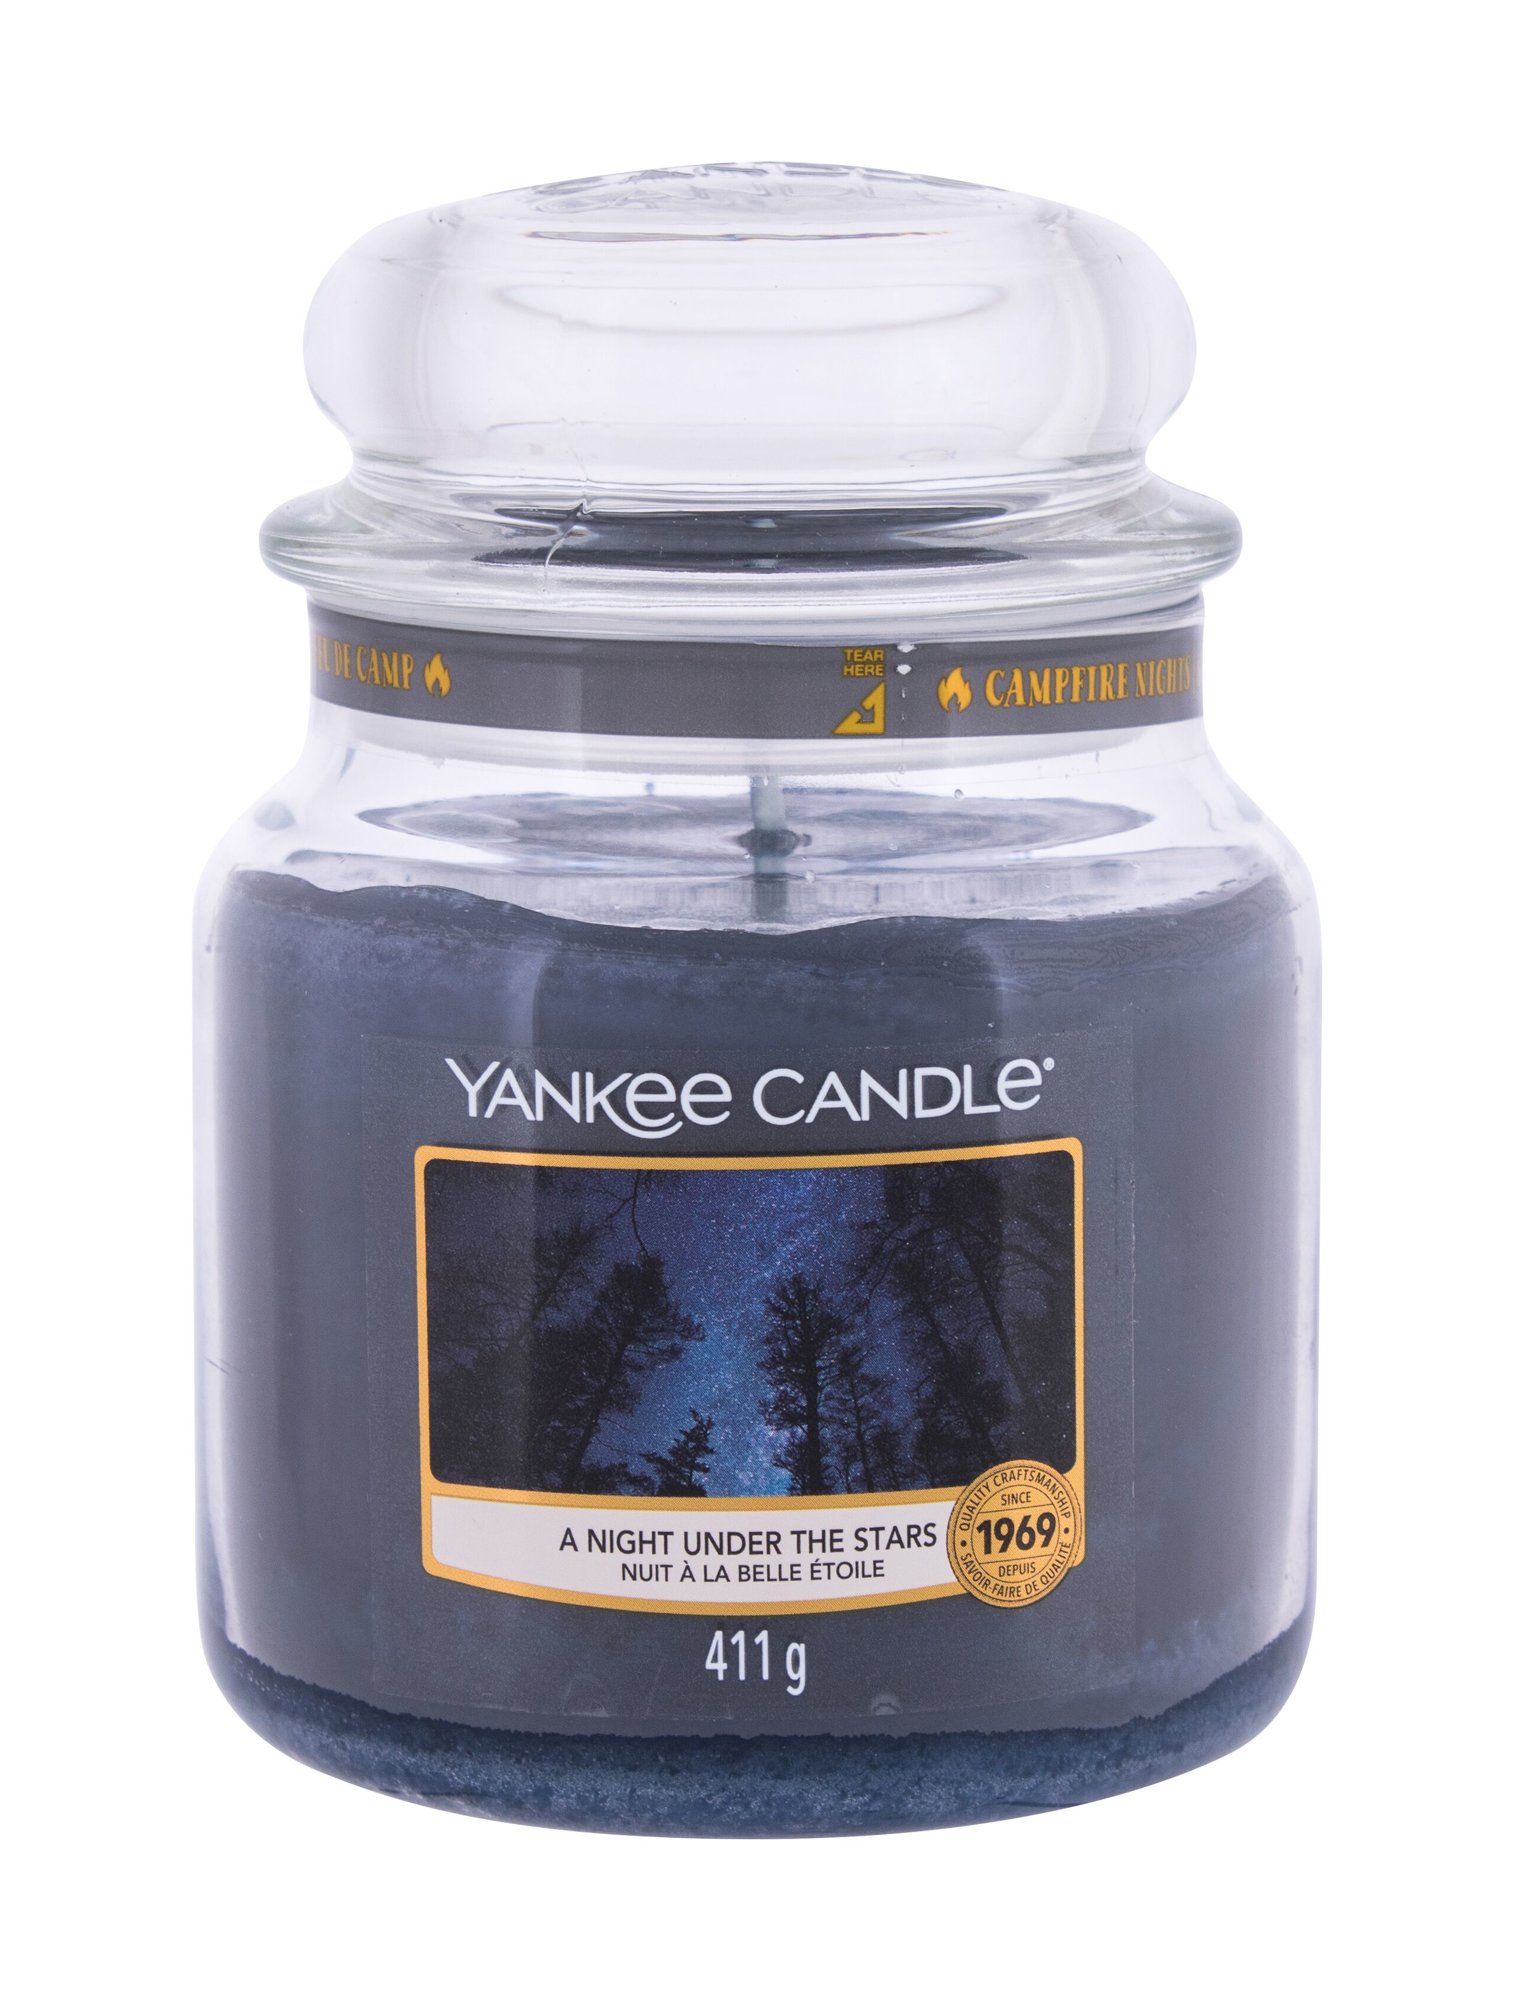 Yankee Candle A Night Under The Stars 411g Kvepalai Unisex Scented Candle